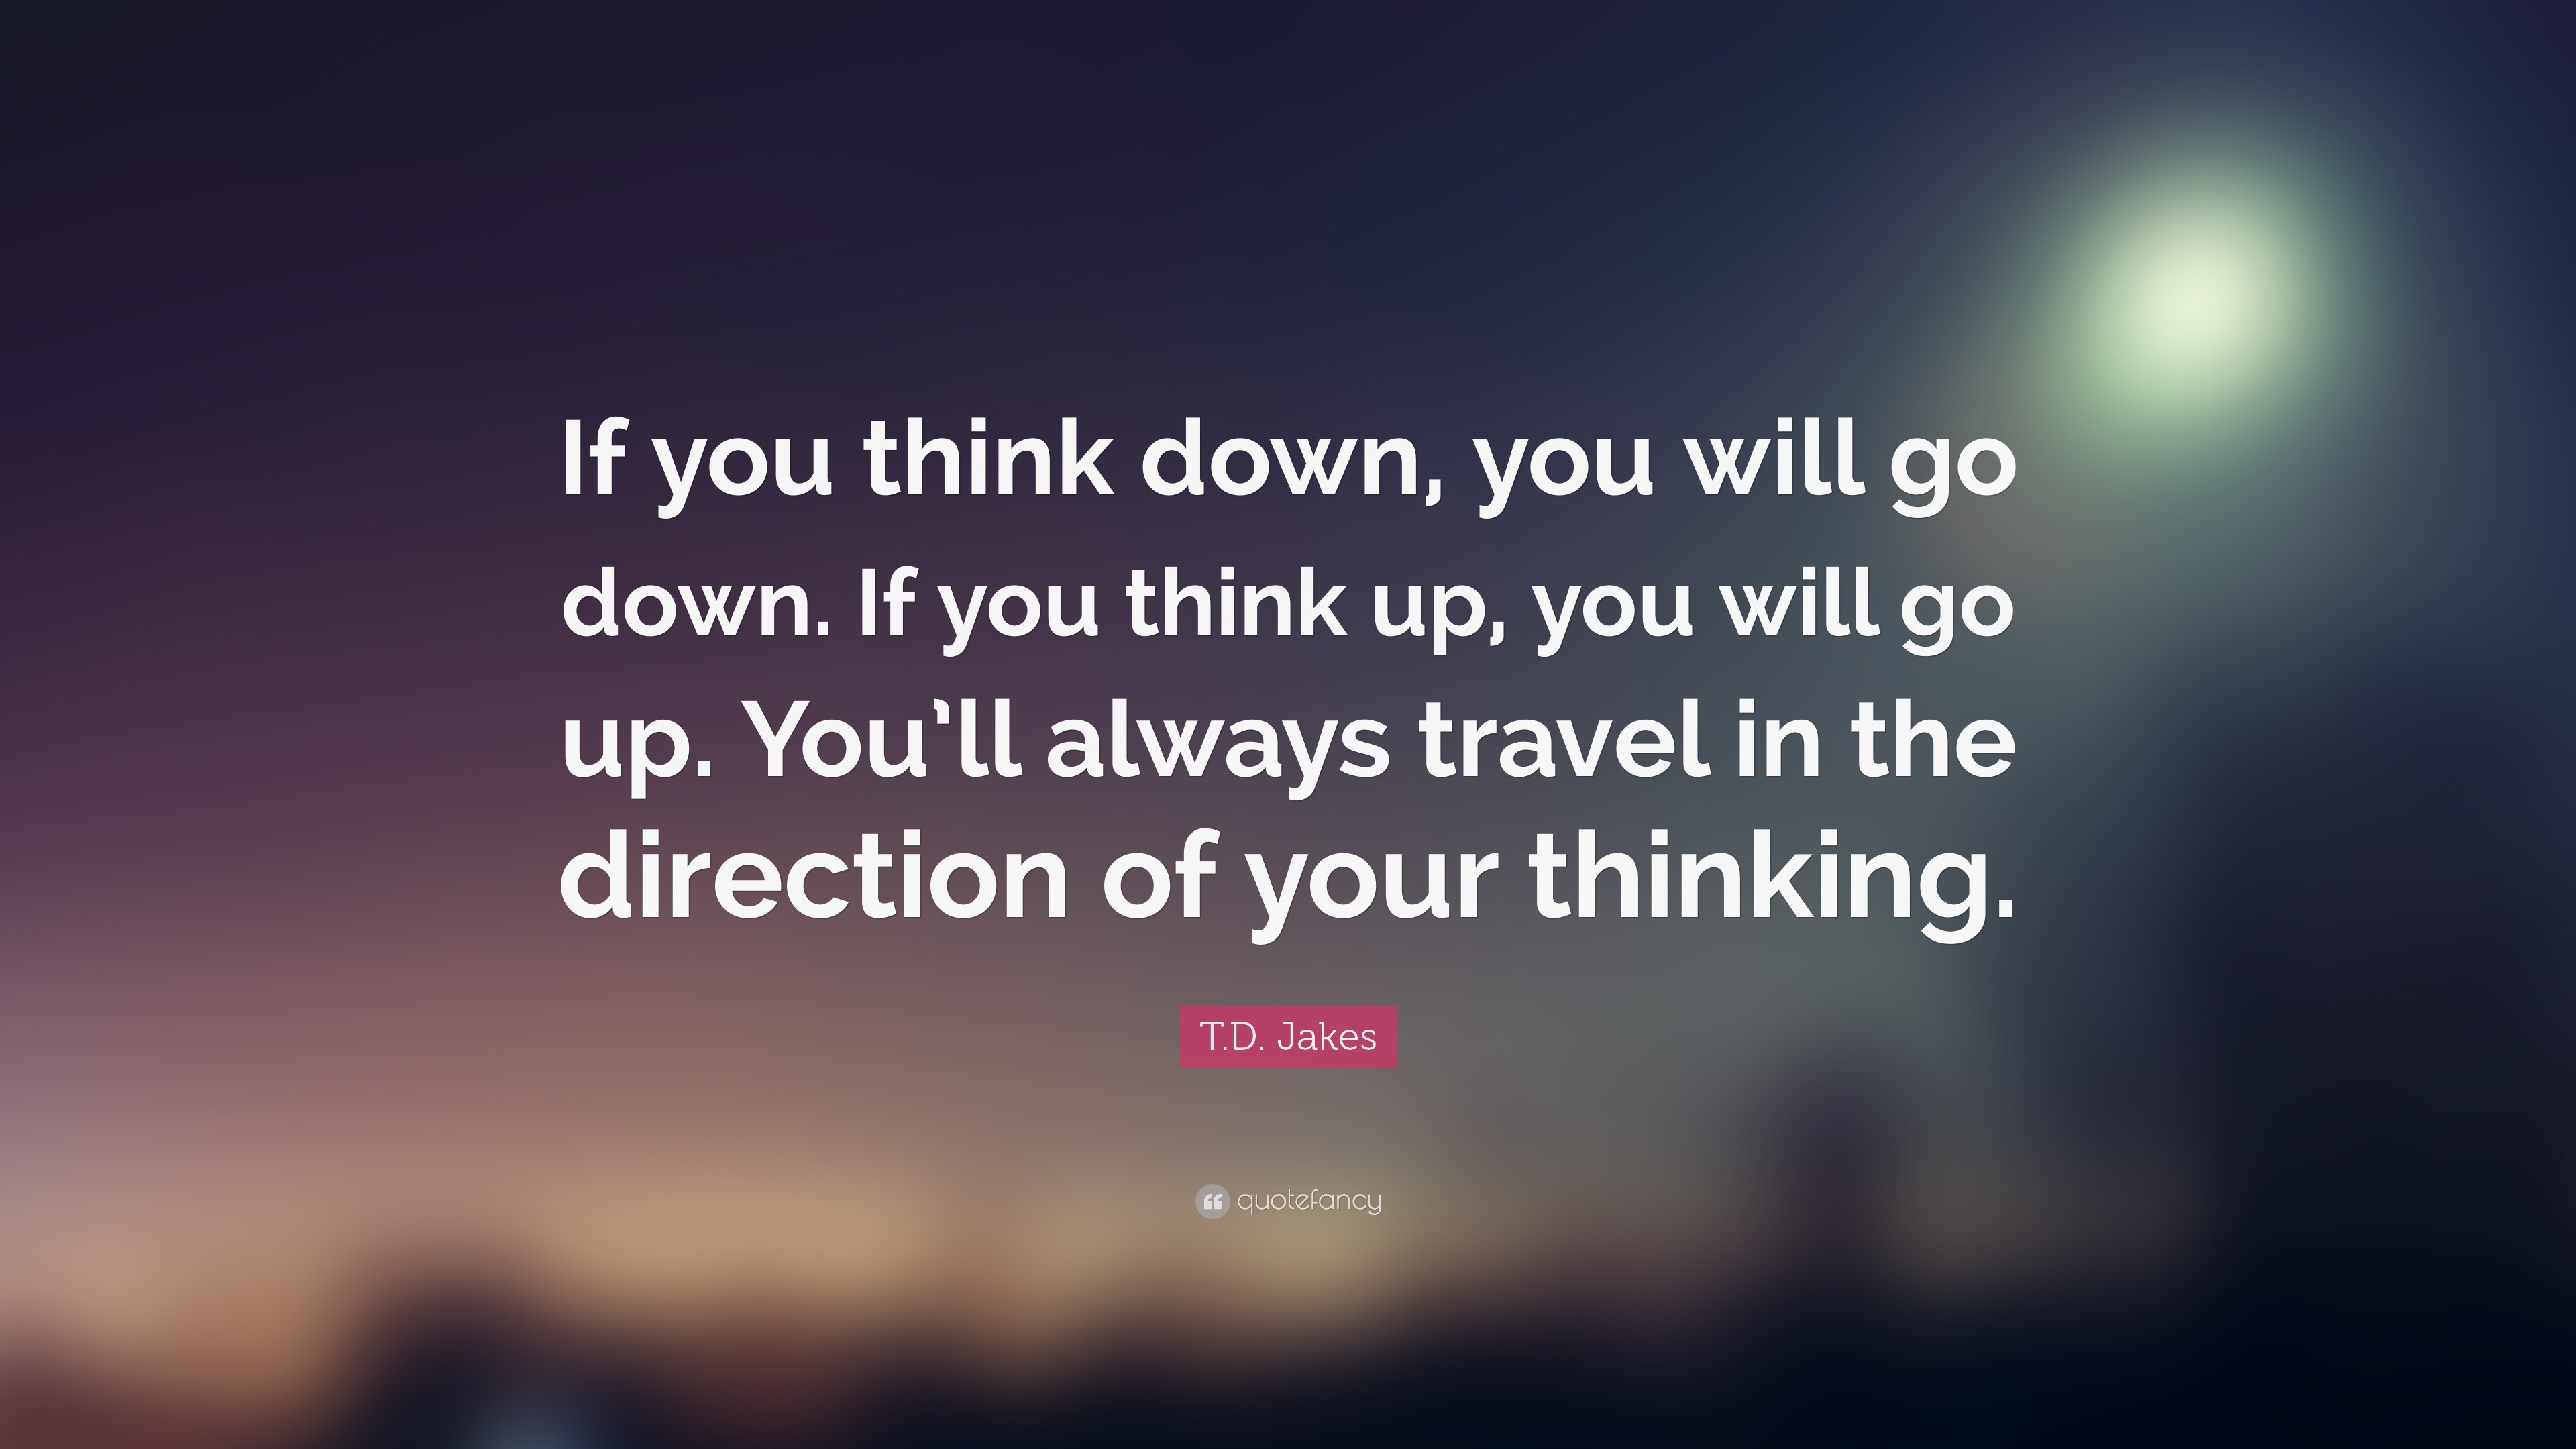 T.D. Jakes Quote “If you think down, you will go down. If